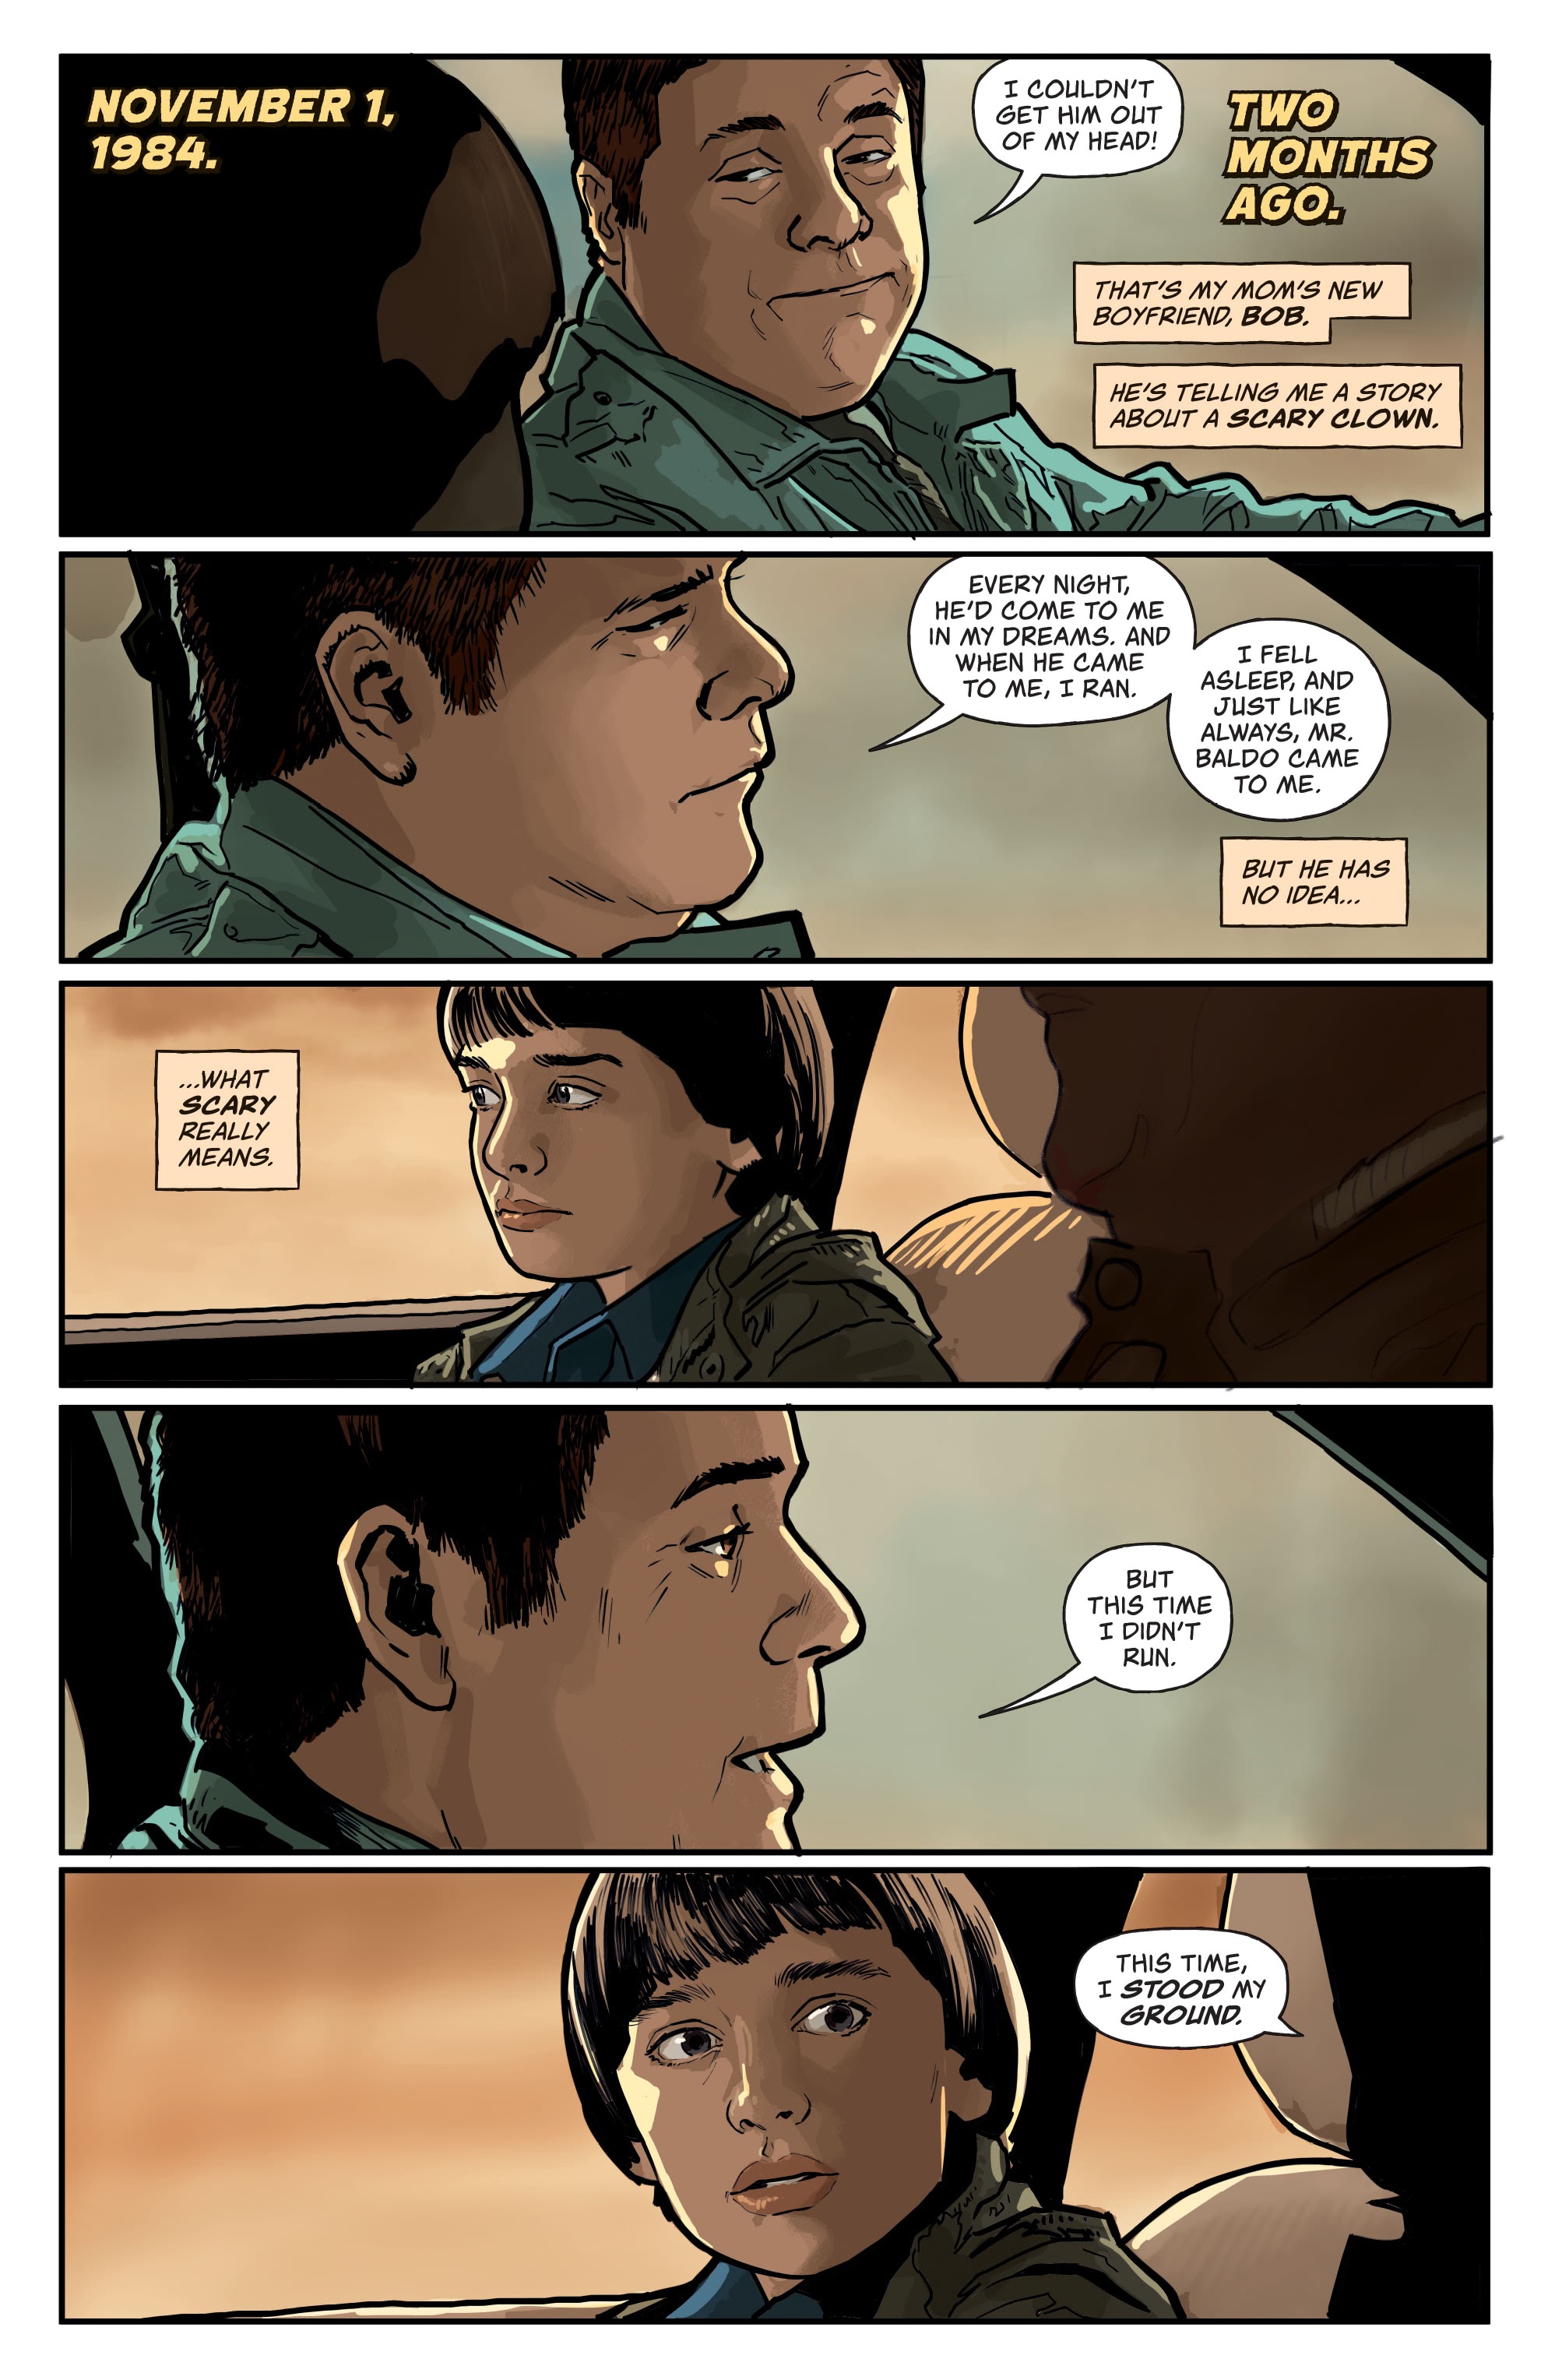 Stranger Things The Tomb Of Ybwen Issue 1 | Read Stranger Things The Tomb  Of Ybwen Issue 1 comic online in high quality. Read Full Comic online for  free - Read comics